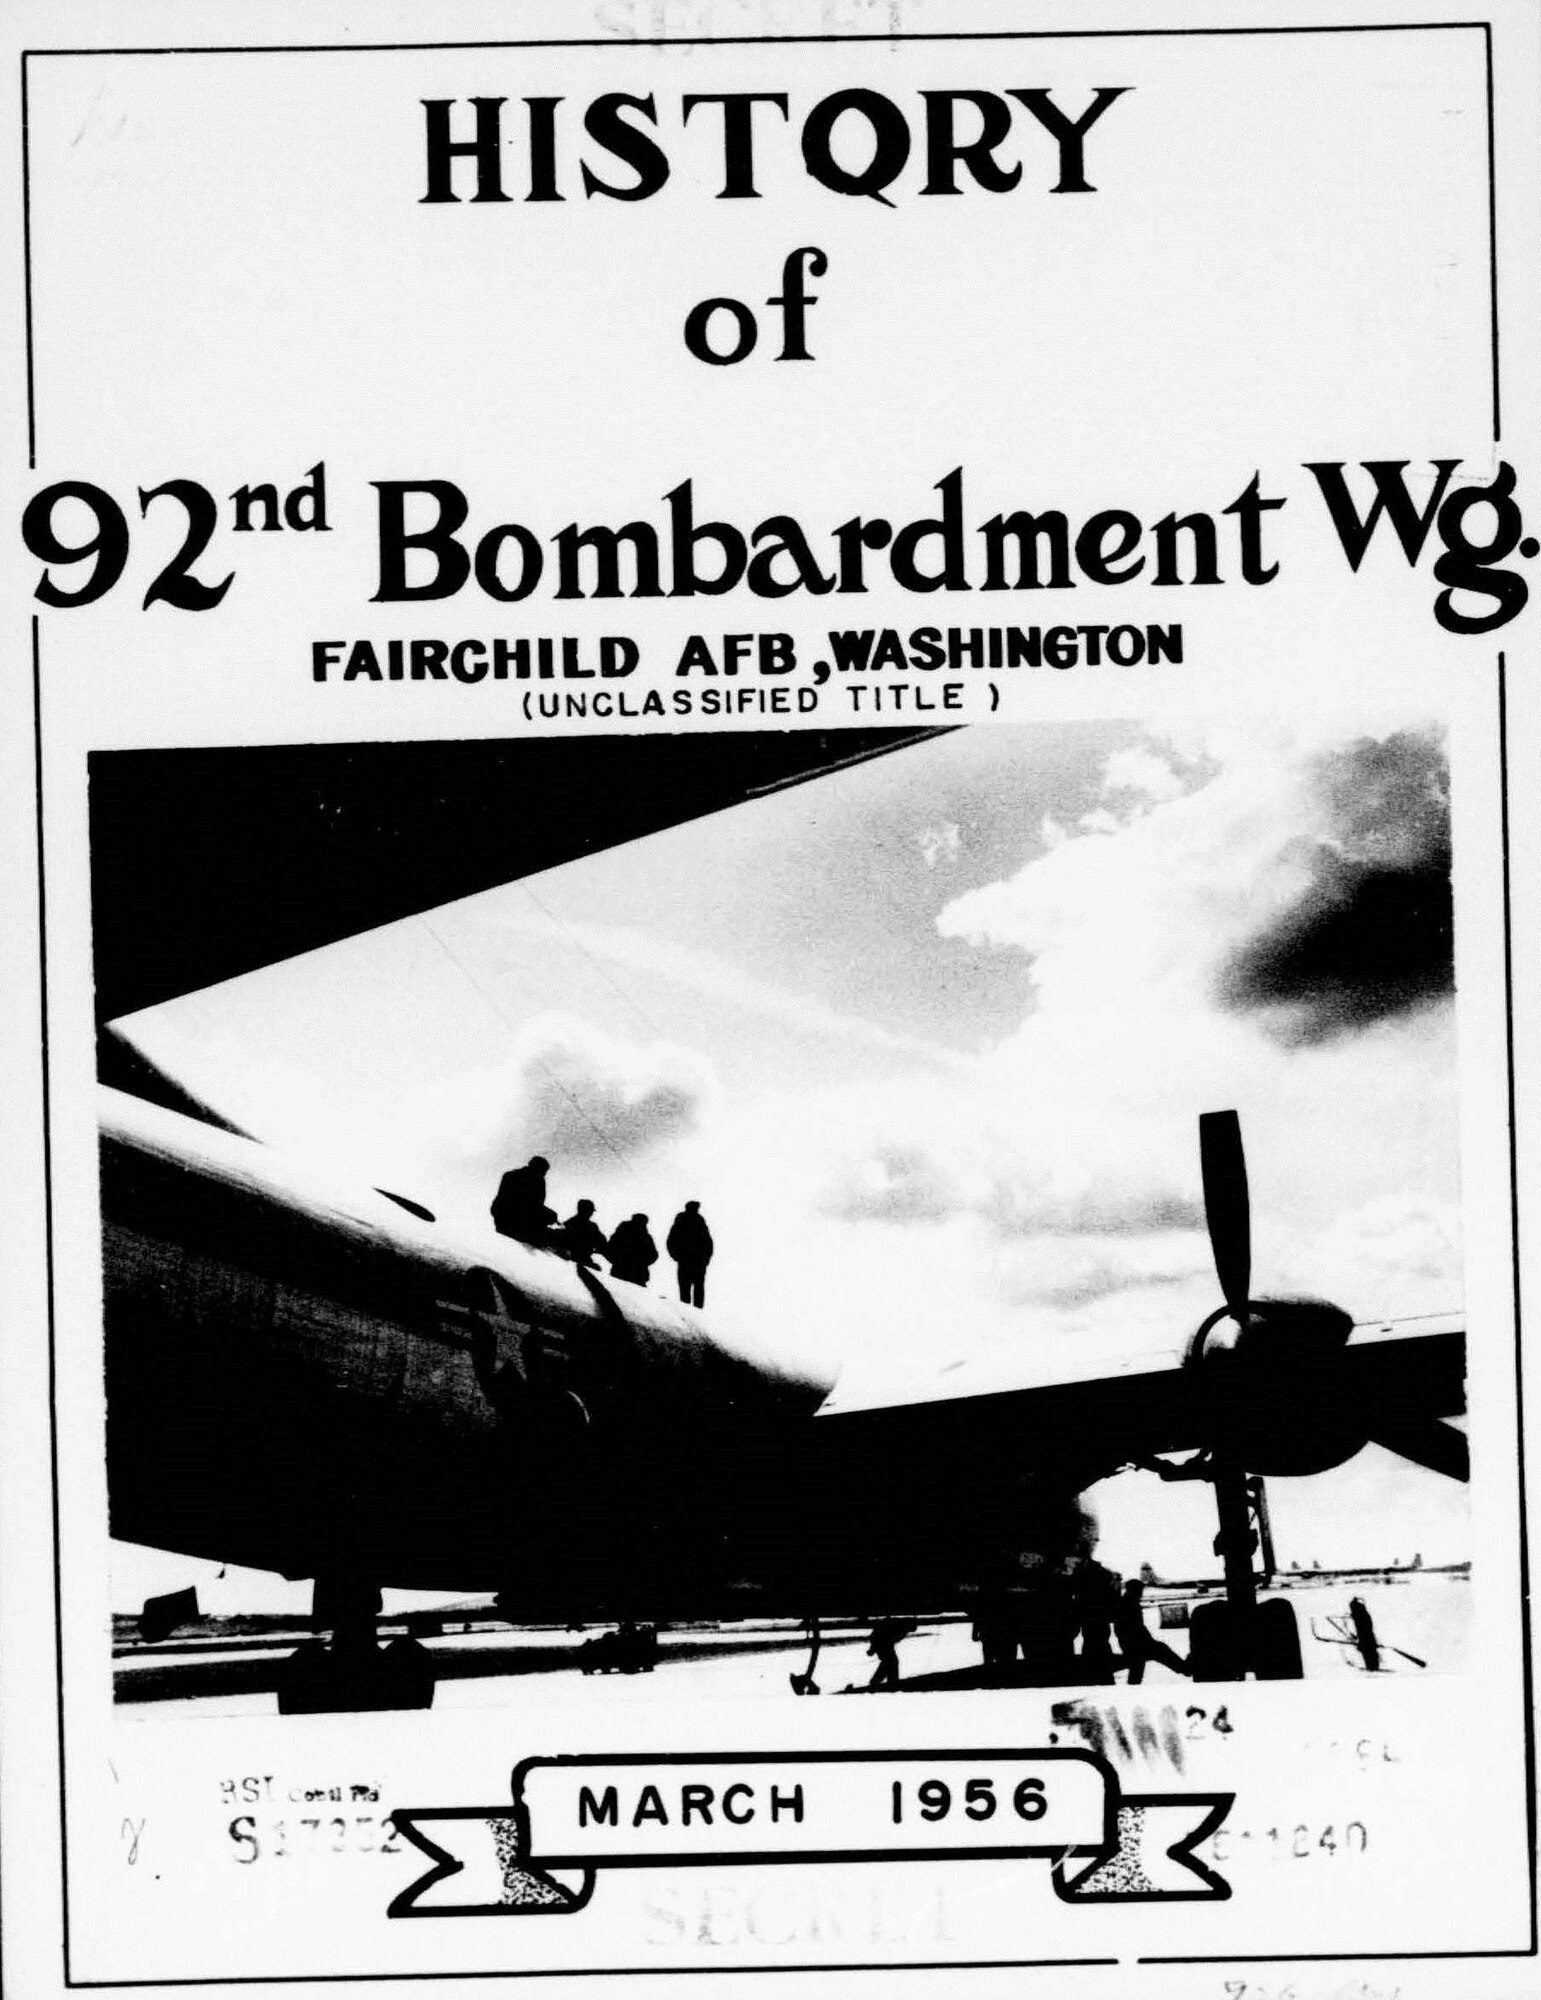 The 92d Bombardment Wing, Very Heavy, was established 17 Nov. 1947, as the host unit at Spokane Army Air Field. The wing acted as the parent wing at Spokane AAF and provided oversight to the 98th BW which was also assigned to the base. The 92nd Bombardment Group, "Fame's Favored Few," with the 325th, 326th and 327th Bombardment Squadrons and the 98th BG with the 343rd, 344th and 345th Bombardment Squadrons were assigned to the 92nd BW and 98th BWs, respectively. When they were born, they were flying the most modern bomber of the day, the Boeing B-29 Superfortress. Their combined total of 60 B-29s made the 92nd BW the largest B-29 wing in Strategic Air Command.